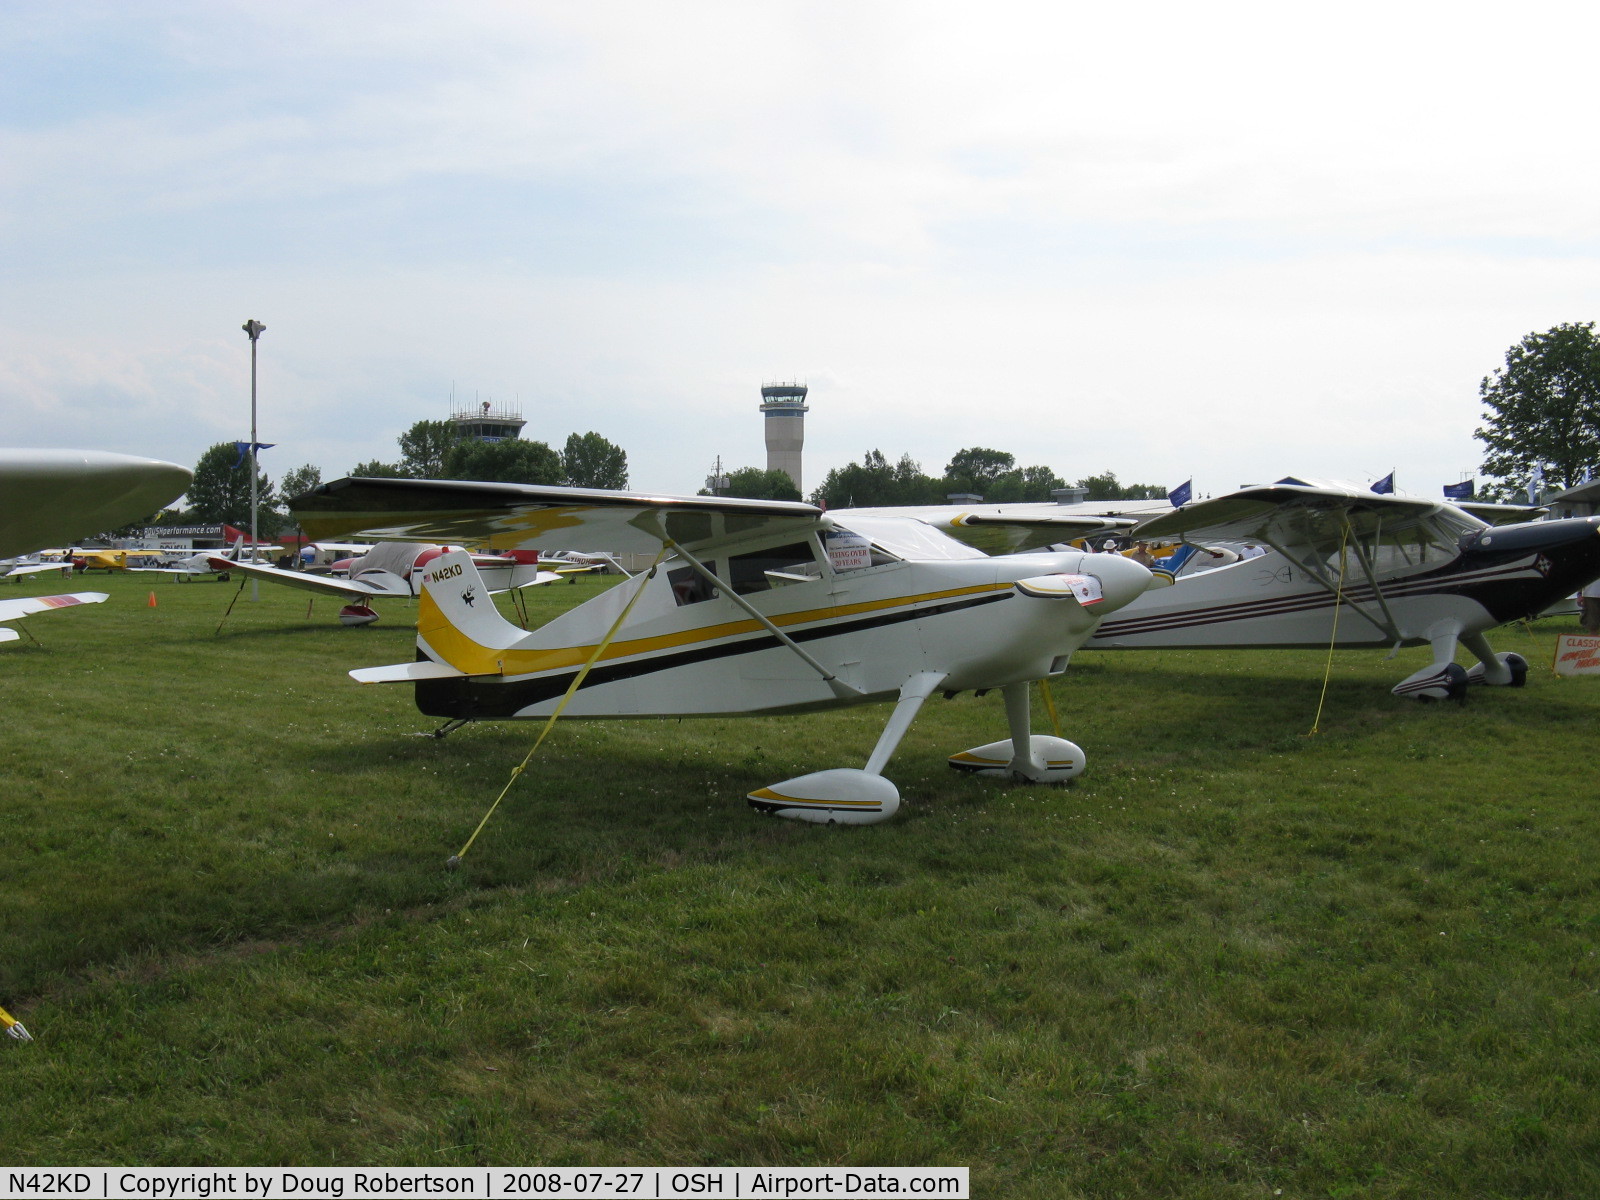 N42KD, 1977 Nesmith M1 Cougar C/N KD-1, 1977 Dannenberg NESMITH COUGAR, Lycoming O-290 135 Hp